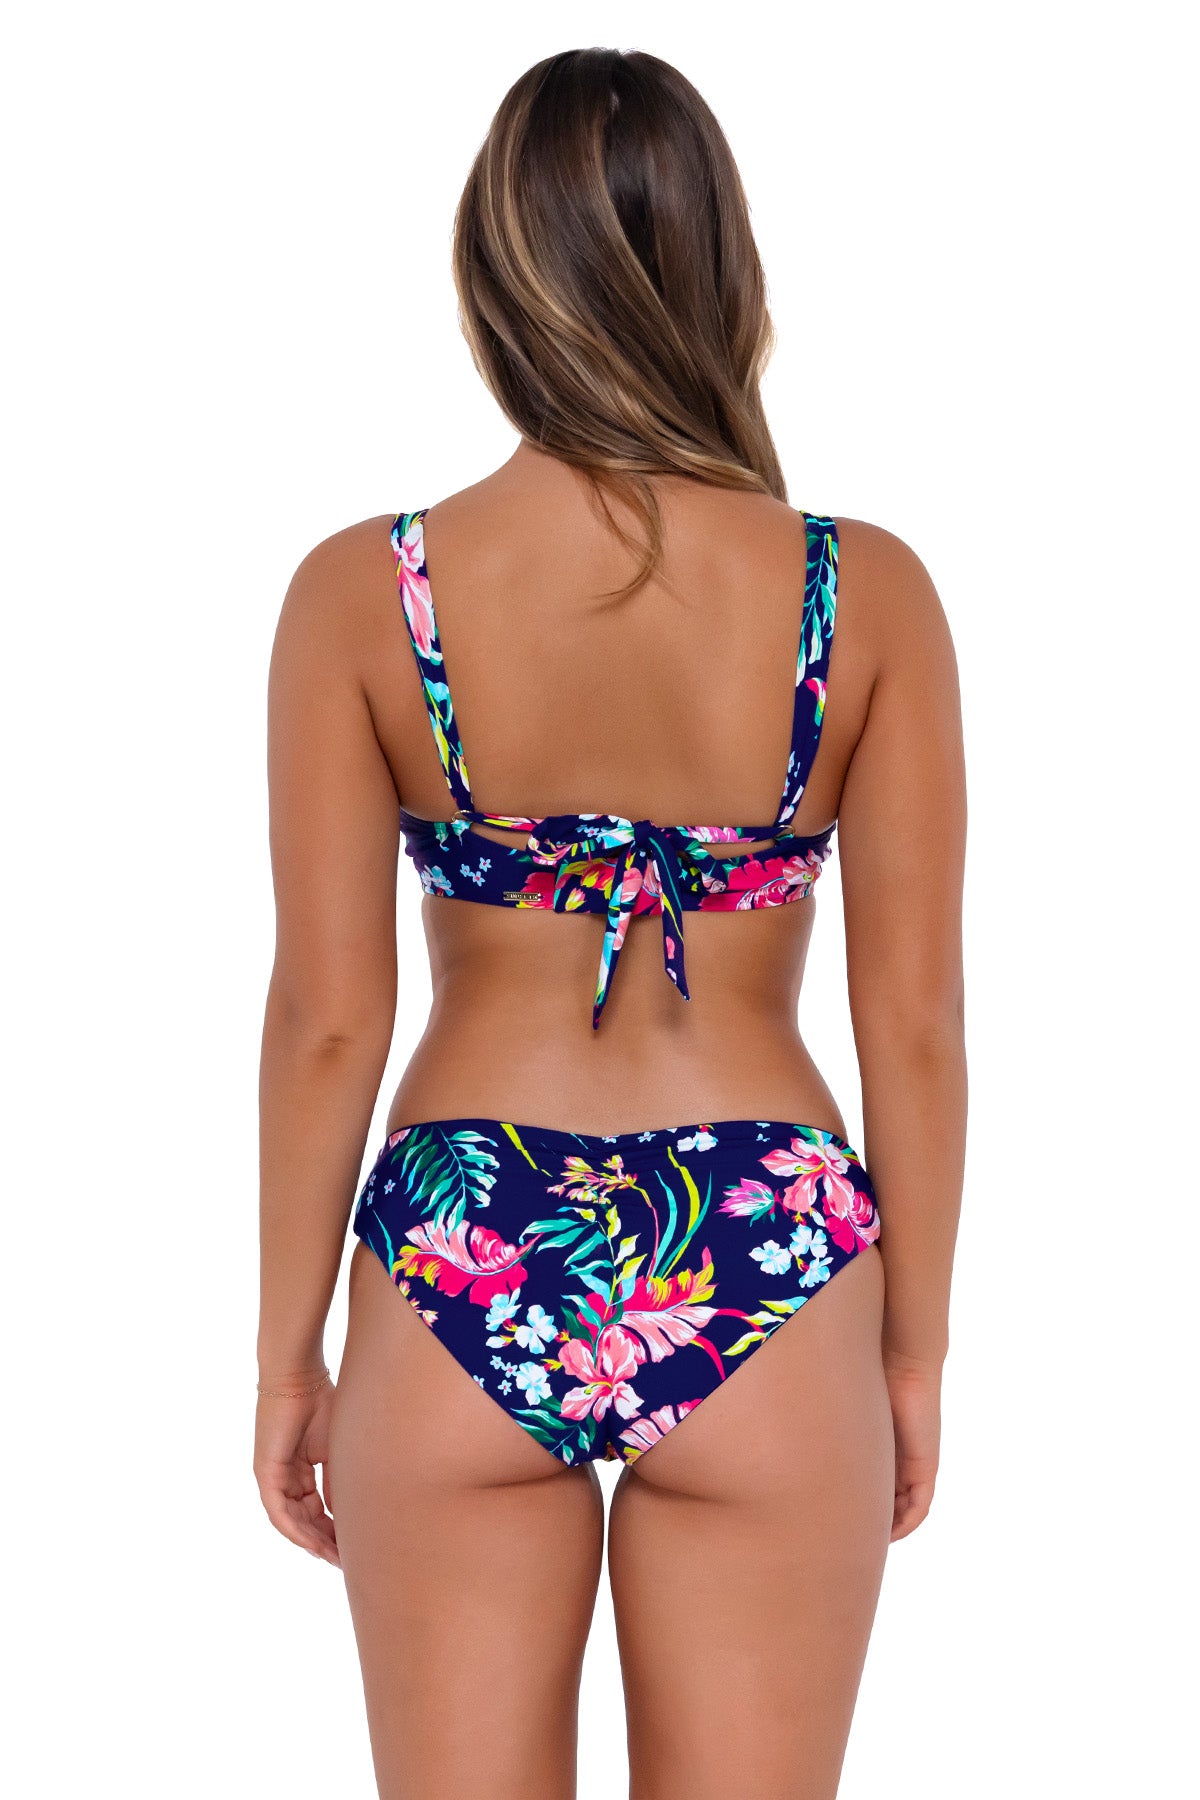 Back pose #1 of Taylor wearing Sunsets Island Getaway Vienna V-Wire Top showing over-the-shoulder tie with matching Alana Reversible Hipster bikini bottom